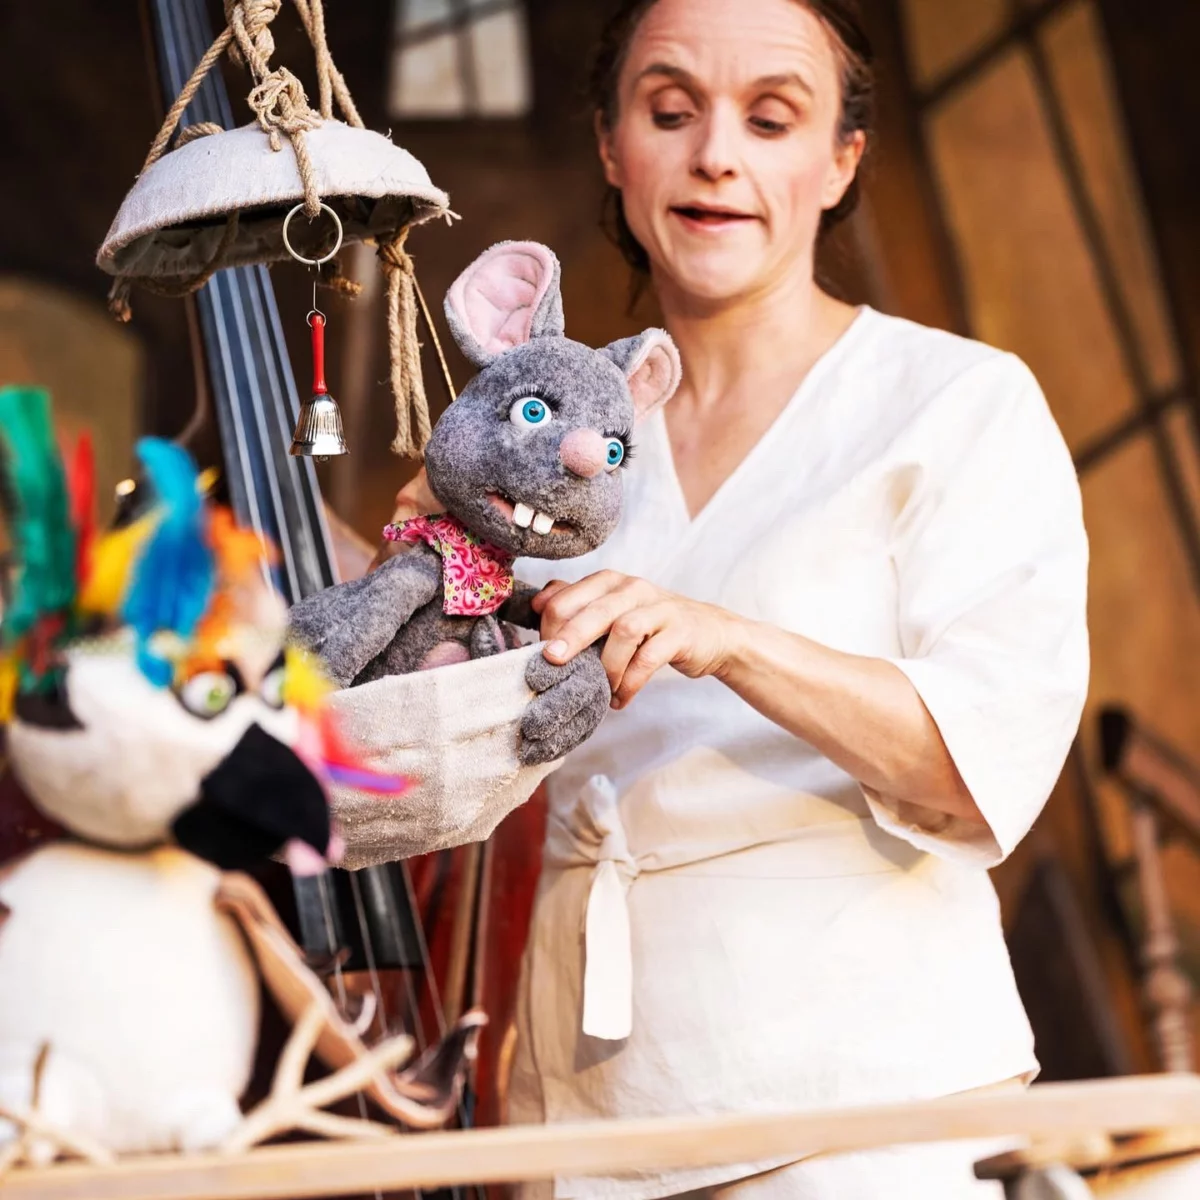 A puppeteer is operating a gray mouse puppet that is peeking out of a bowl in front of her.